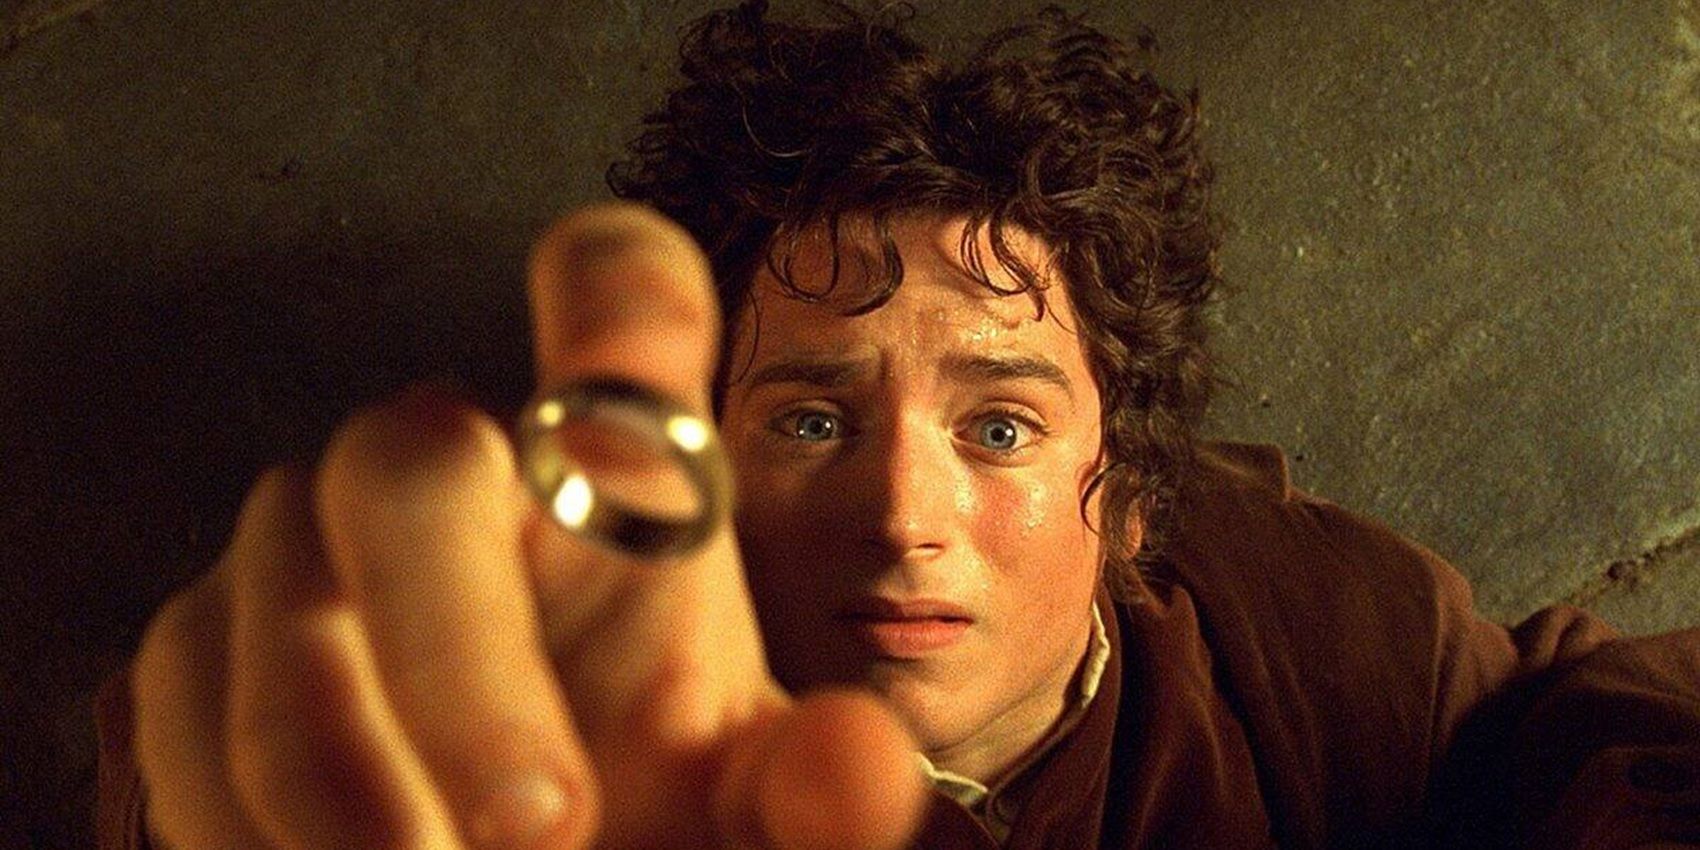 Frodo catches the One Ring in The Lord of the Rings The Fellowship of the Ring